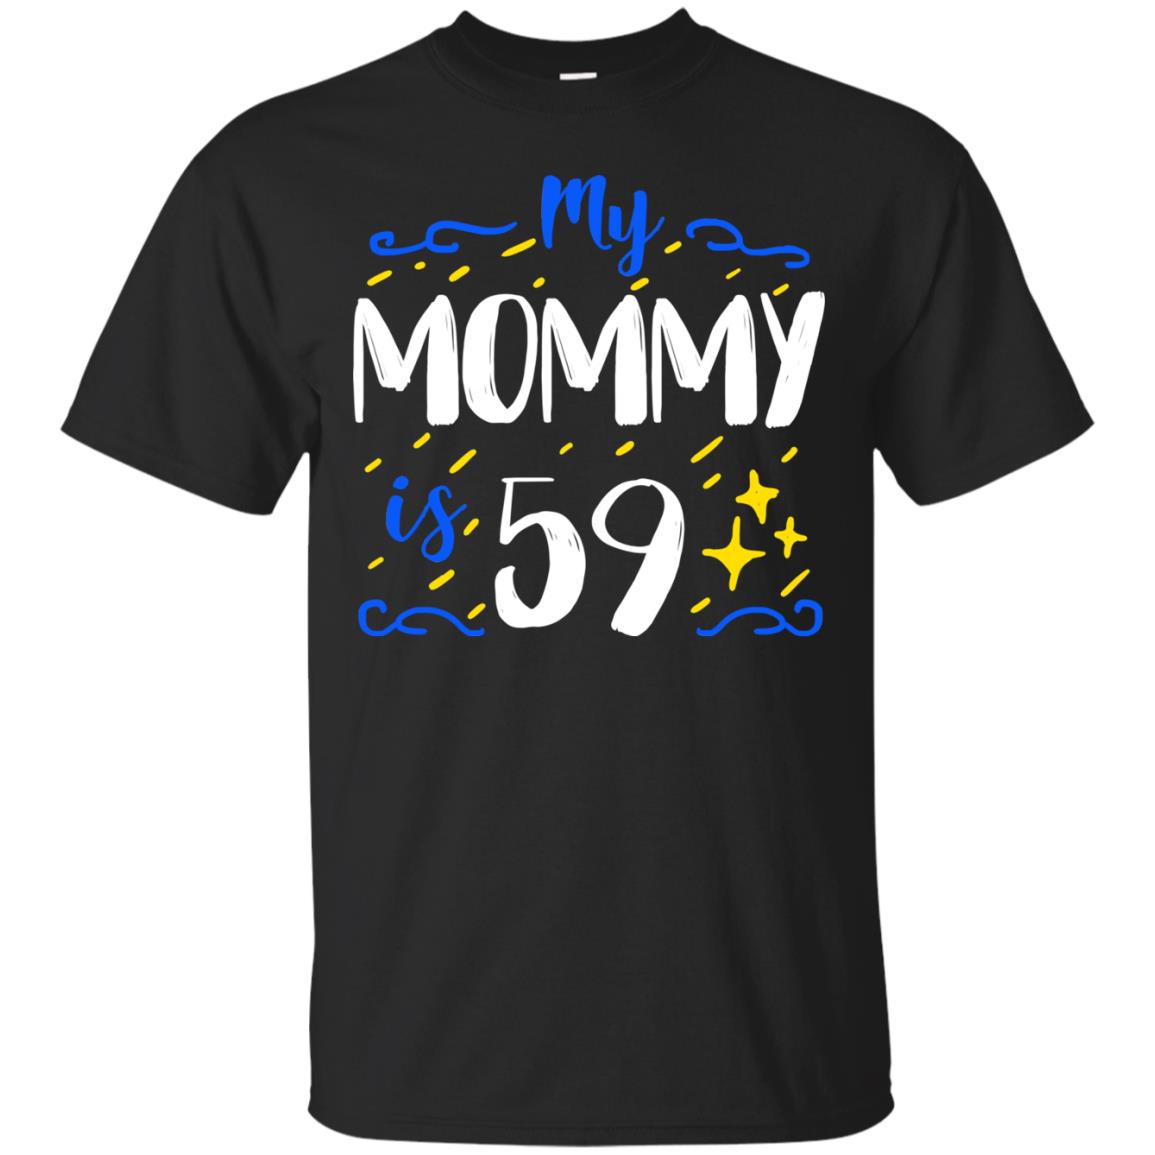 My Mommy Is 59 59th Birthday Mommy Shirt For Sons Or DaughtersG200 Gildan Ultra Cotton T-Shirt